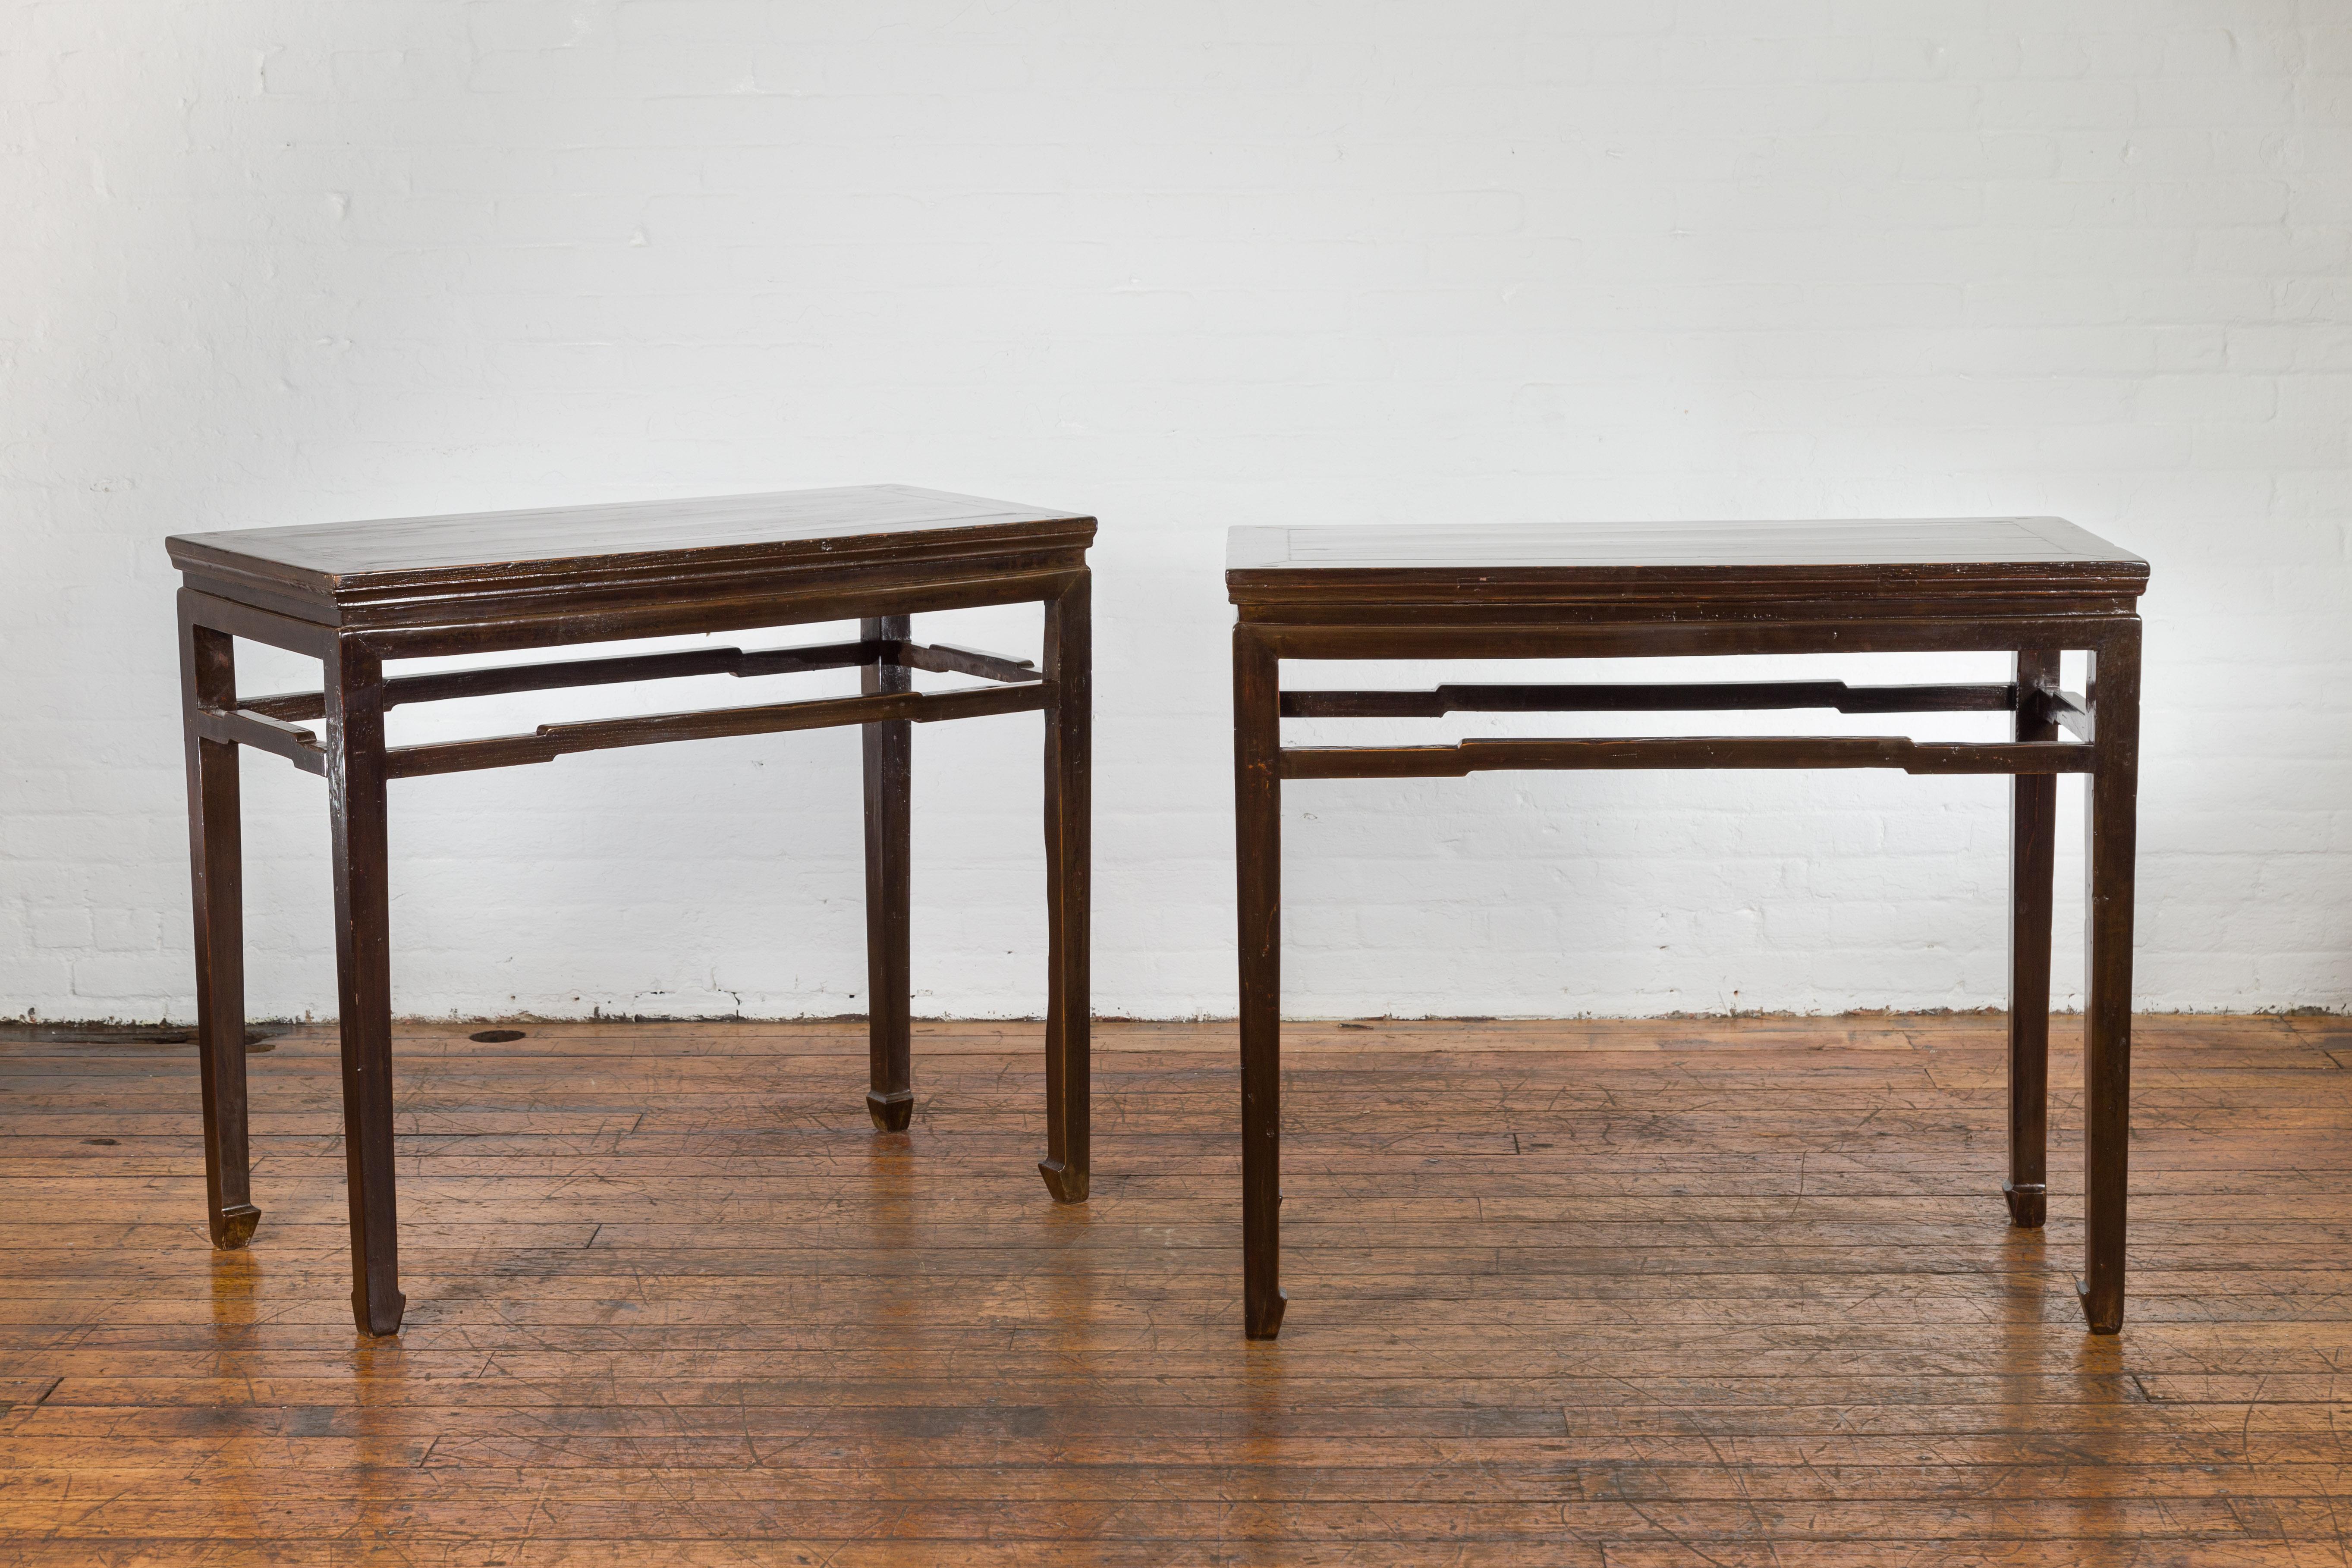 A pair of Chinese late Qing Dynasty period wine tasting console tables from the early 20th century, with humpback stretchers, horse hoof feet and dark brown lacquer. Created in China during the late Qing Dynasty period in the early years of the 20th